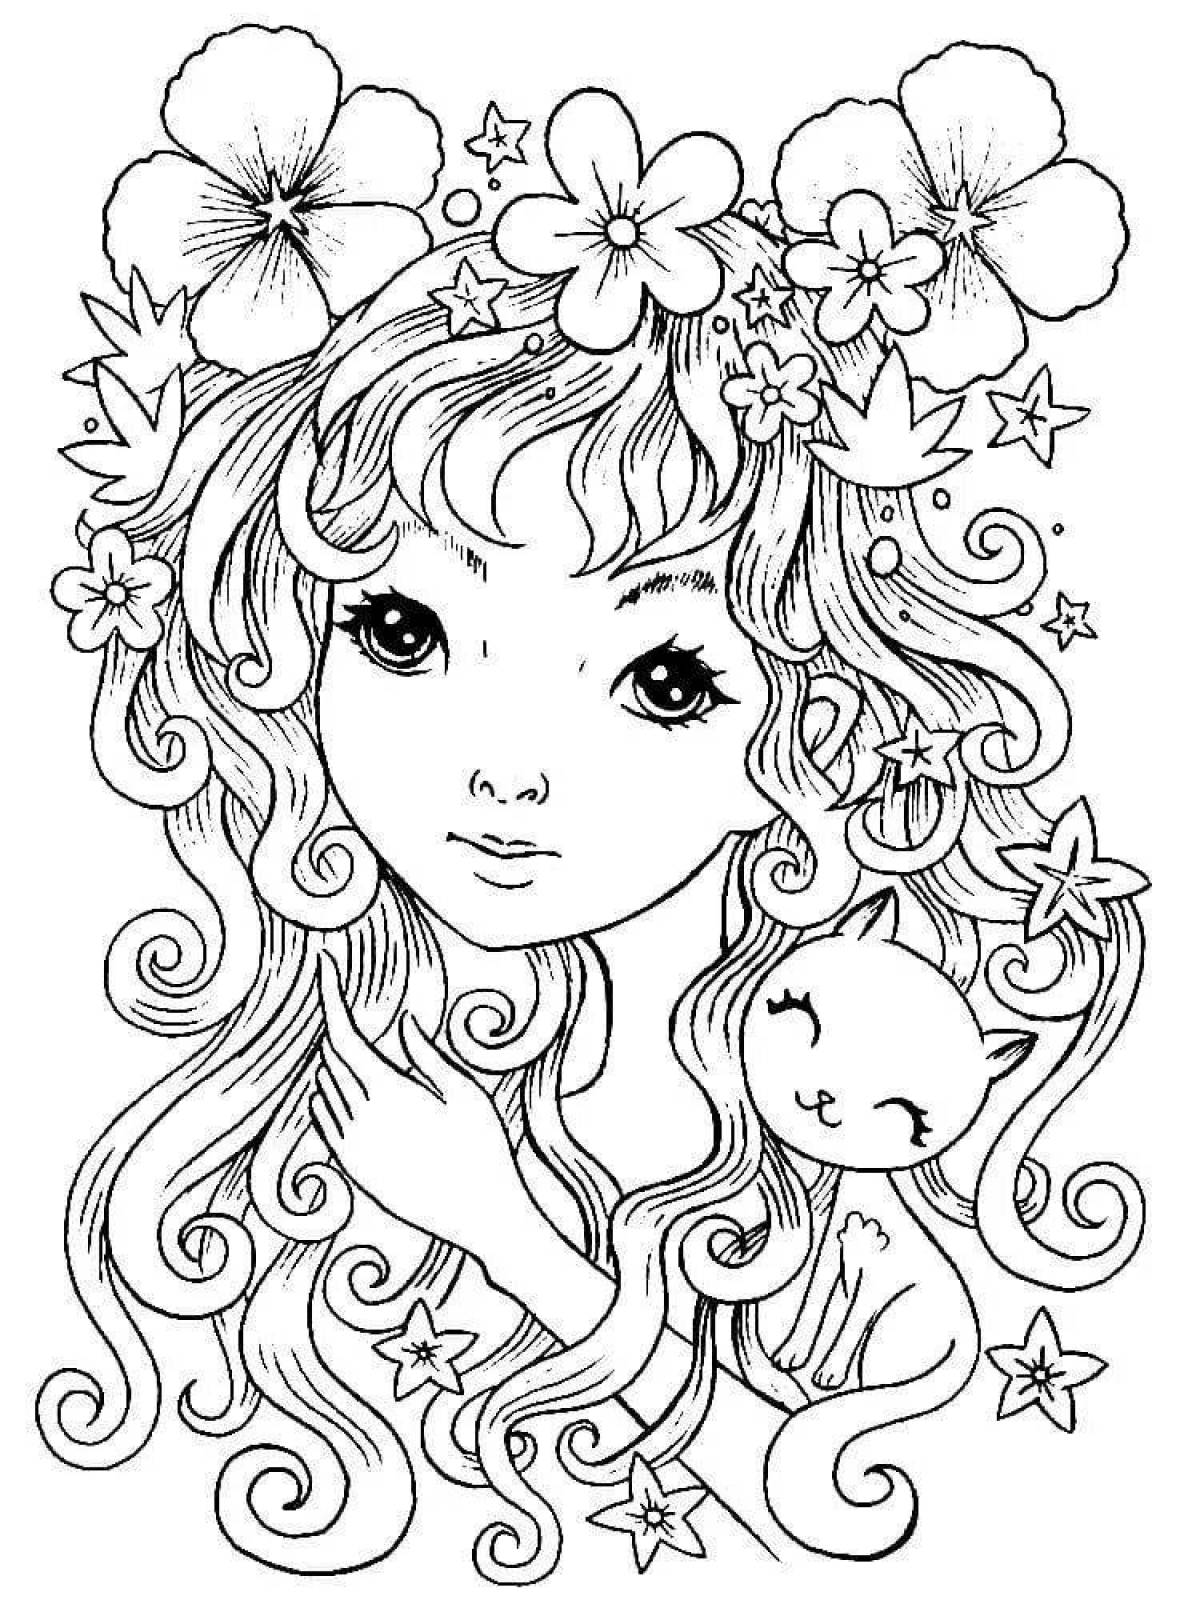 Color-frenzy coloring page for girls 12-13 years old